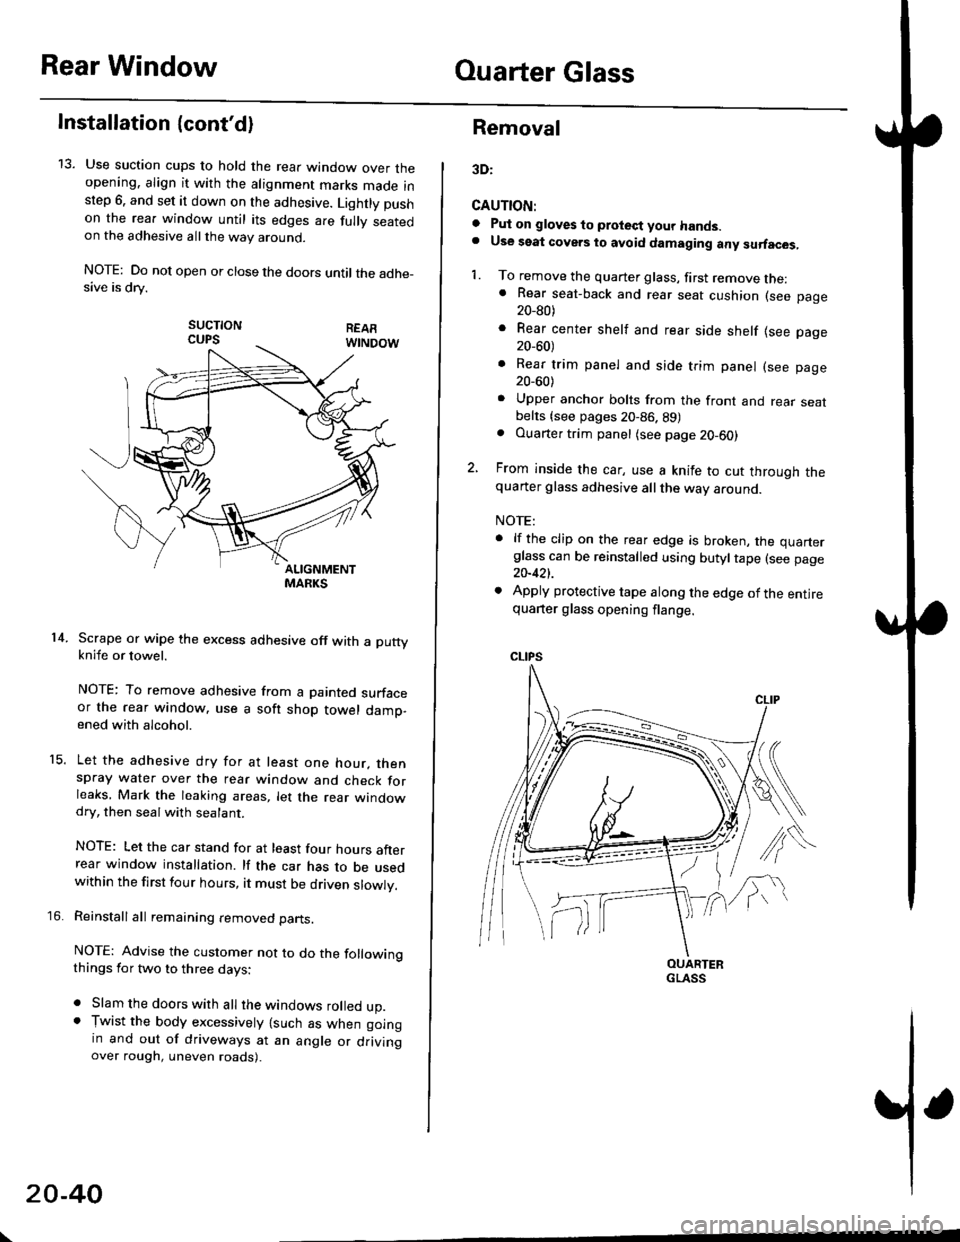 HONDA CIVIC 2000 6.G Workshop Manual Rear WindowOuarter Glass
Installation {contd)
13. Use suction cups to hold the rear window over theopening. align it with the alignment marks made inslep 6. and set it down on the adhesive. Lightly p